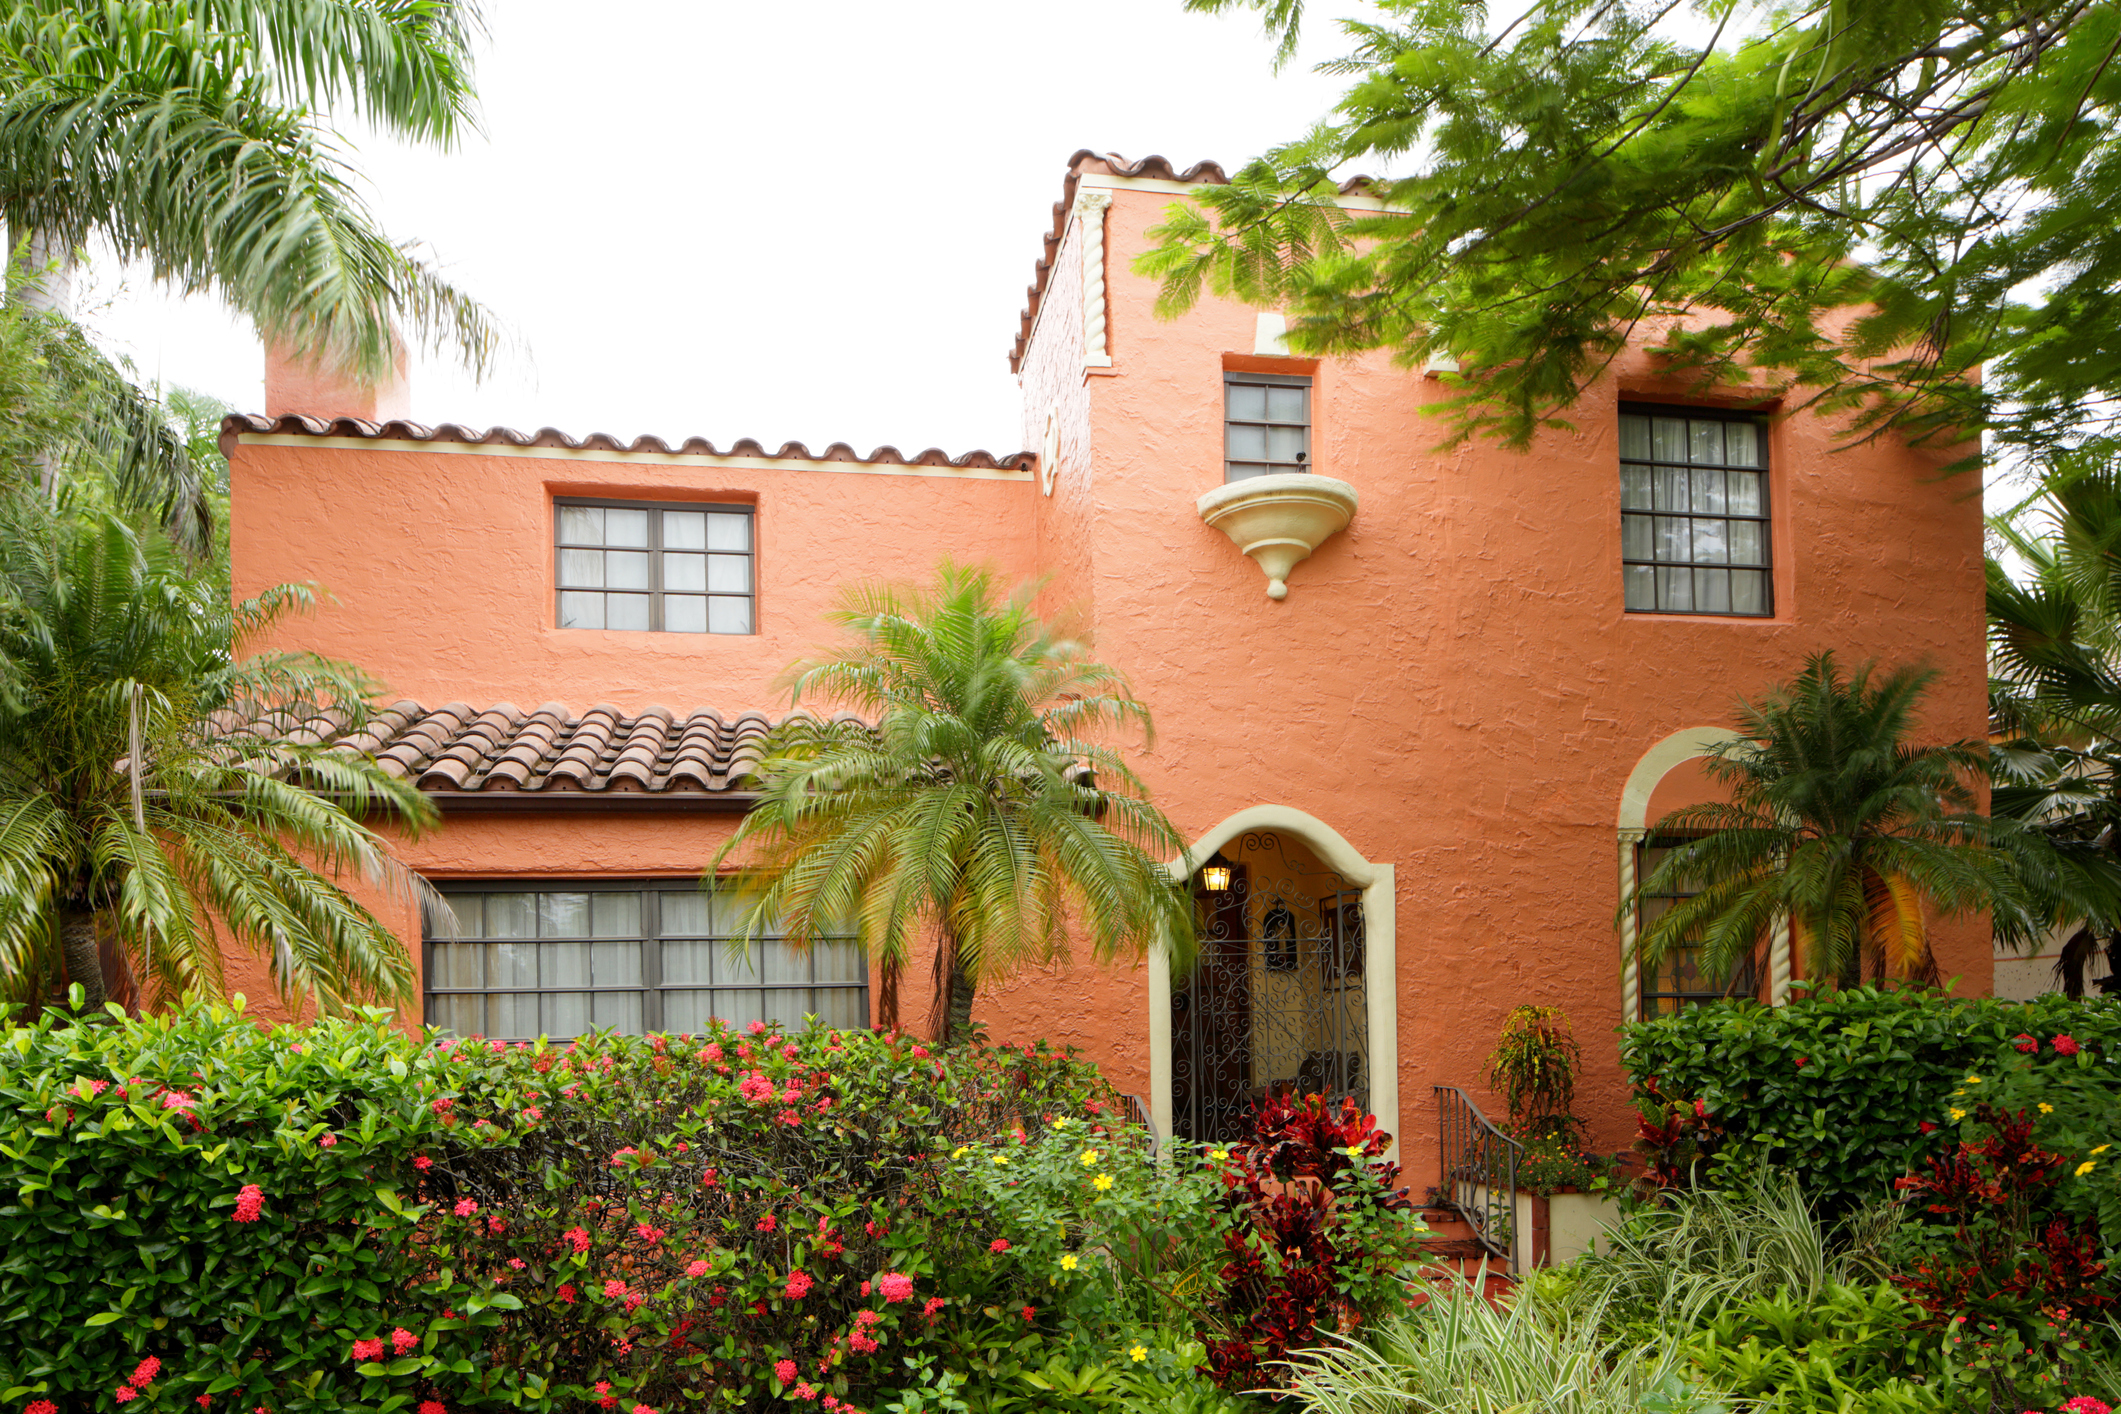 The front exterior of an orange-tinted Spanish colonial style home with plants and trees in the front yard.